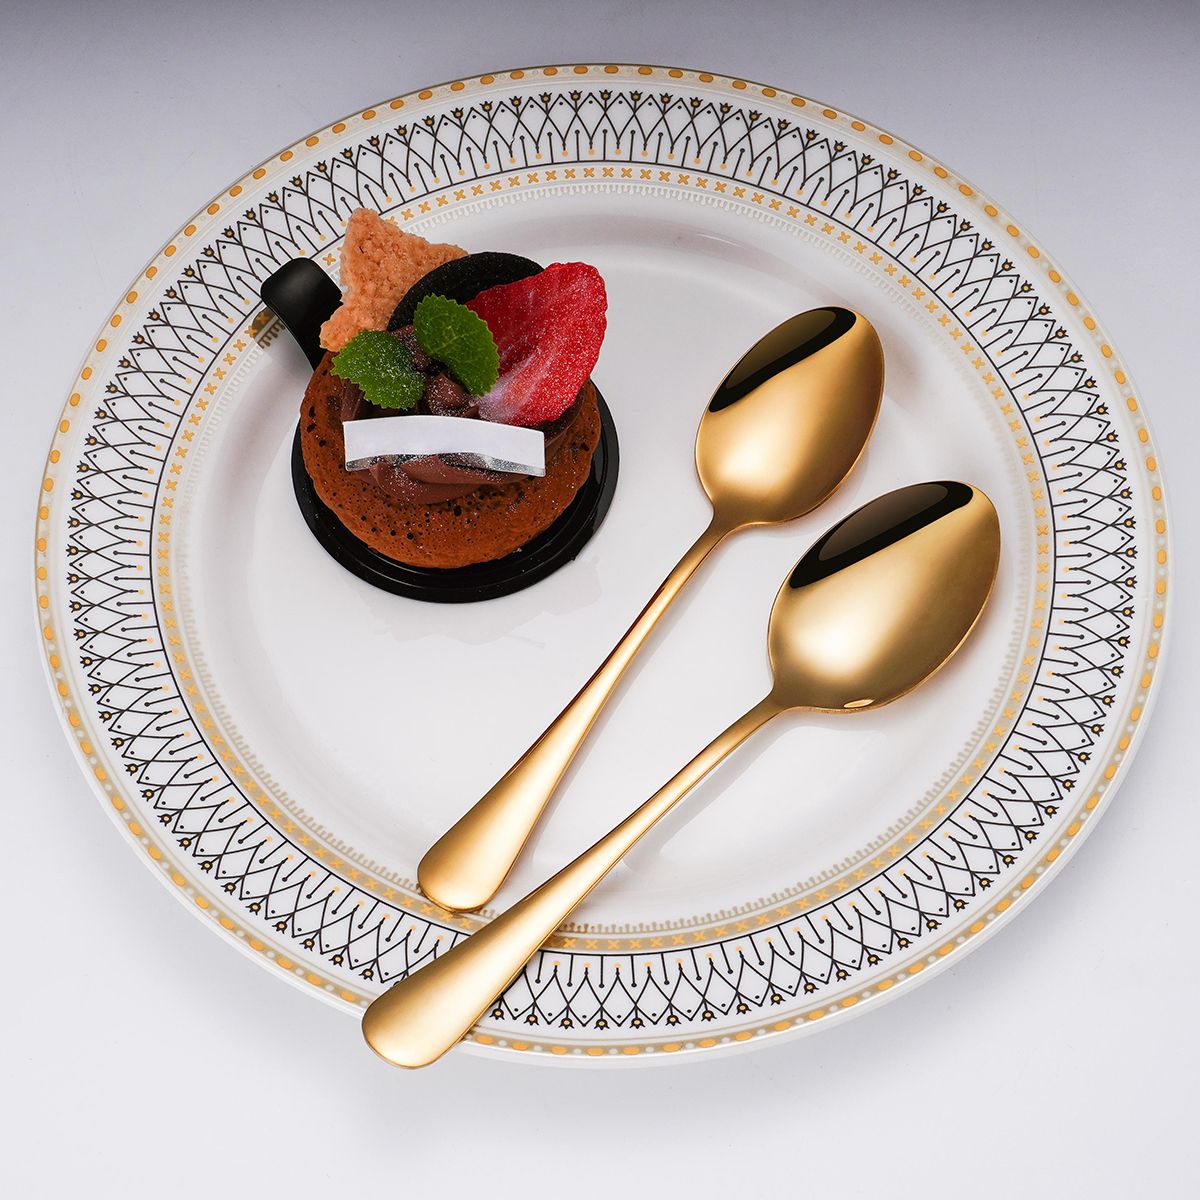 Gold Silverware Black Runcible Spoon Little Baby Food American Flatware Factory Manufacturer Supplier Knife And Fork